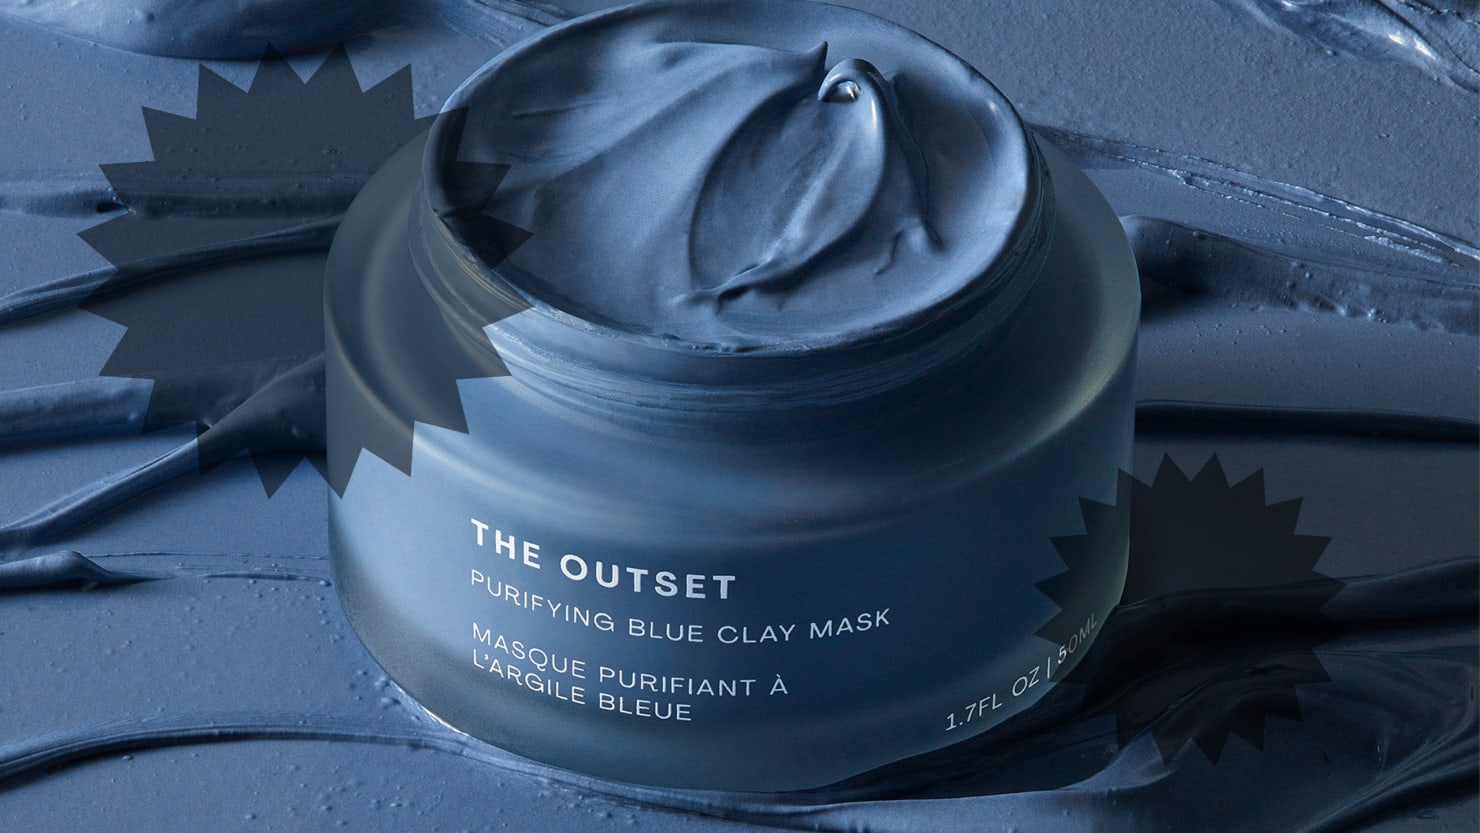 Scarlett Johansson’s new Purifying Blue Clay Mask is like face in a bottle.